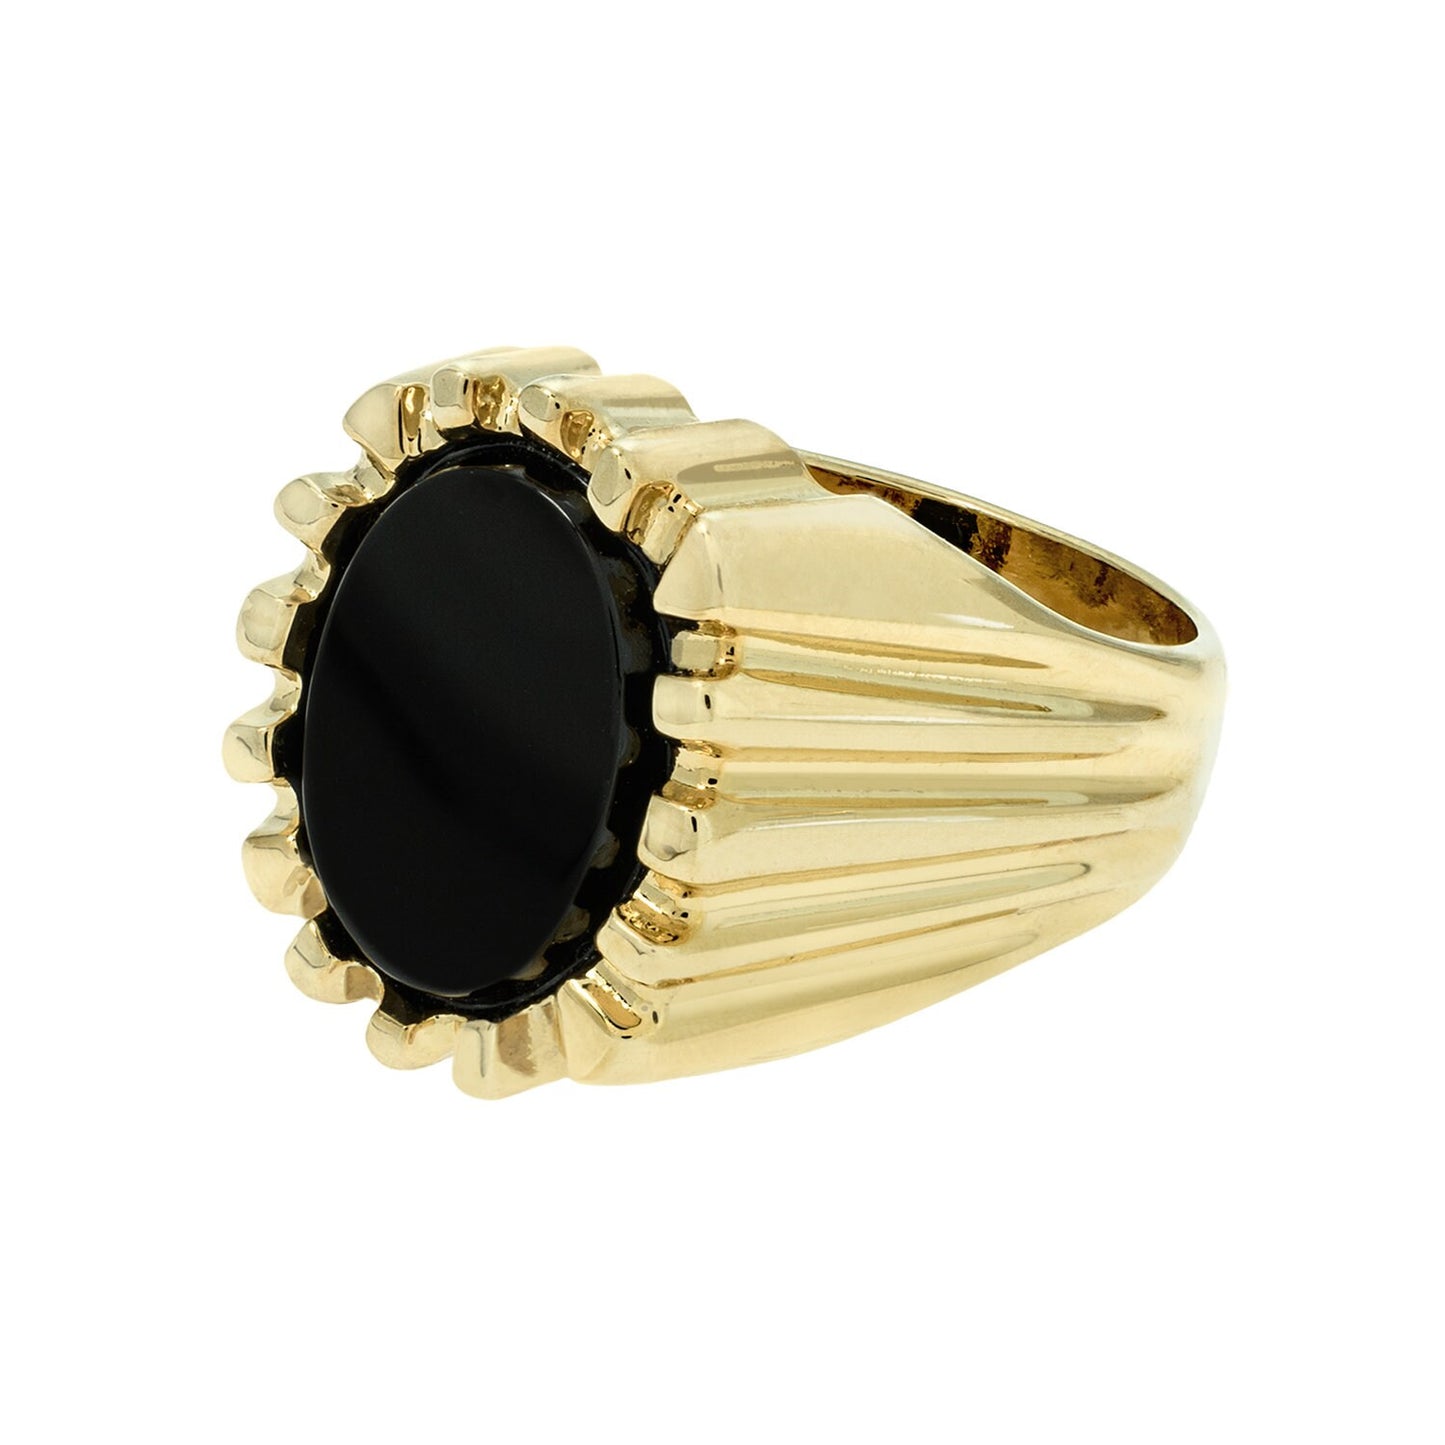 Vintage Ring 1980s Men's Genuine Onyx 18kt Gold Plated Antique Jewelry for Men #R1960 - Limited Stock - Never Worn